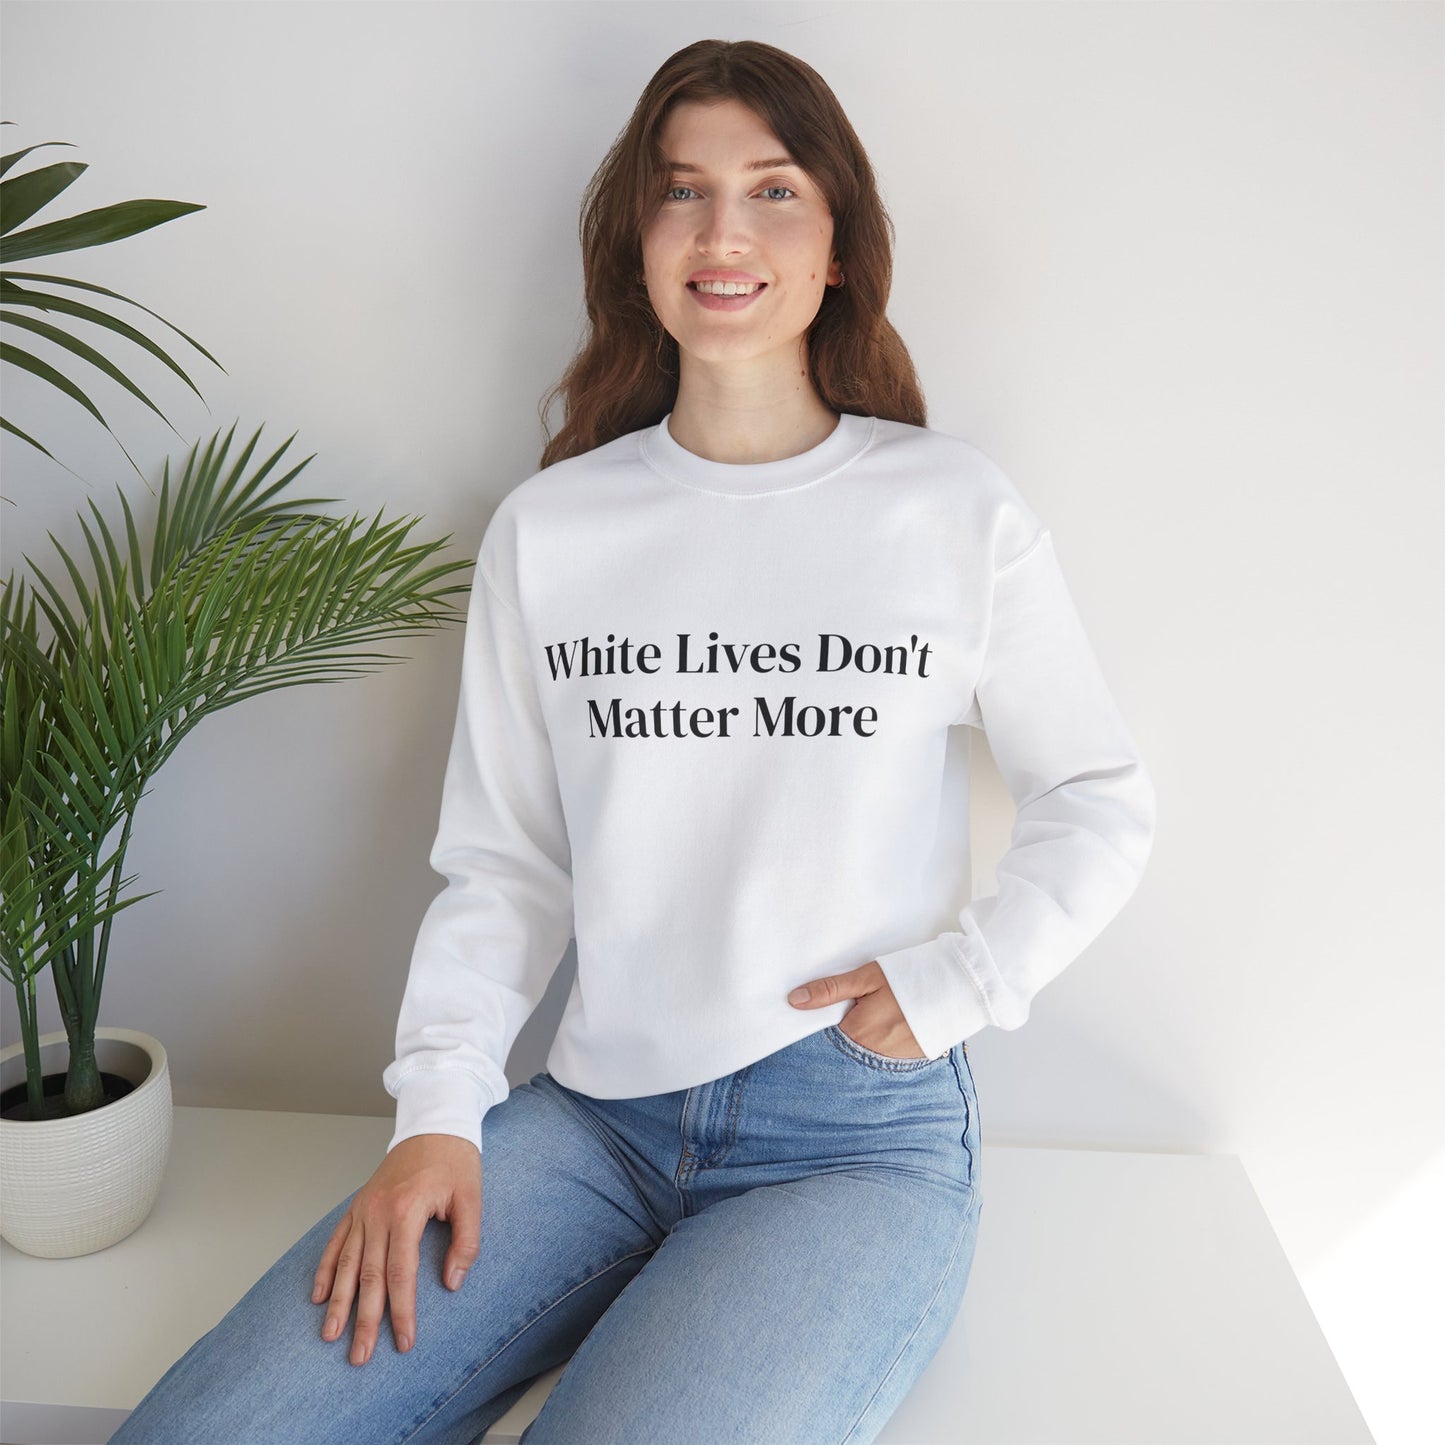 "White Lives Don't Matter More" White Crewneck Sweatshirt with Black 'Typed' Text